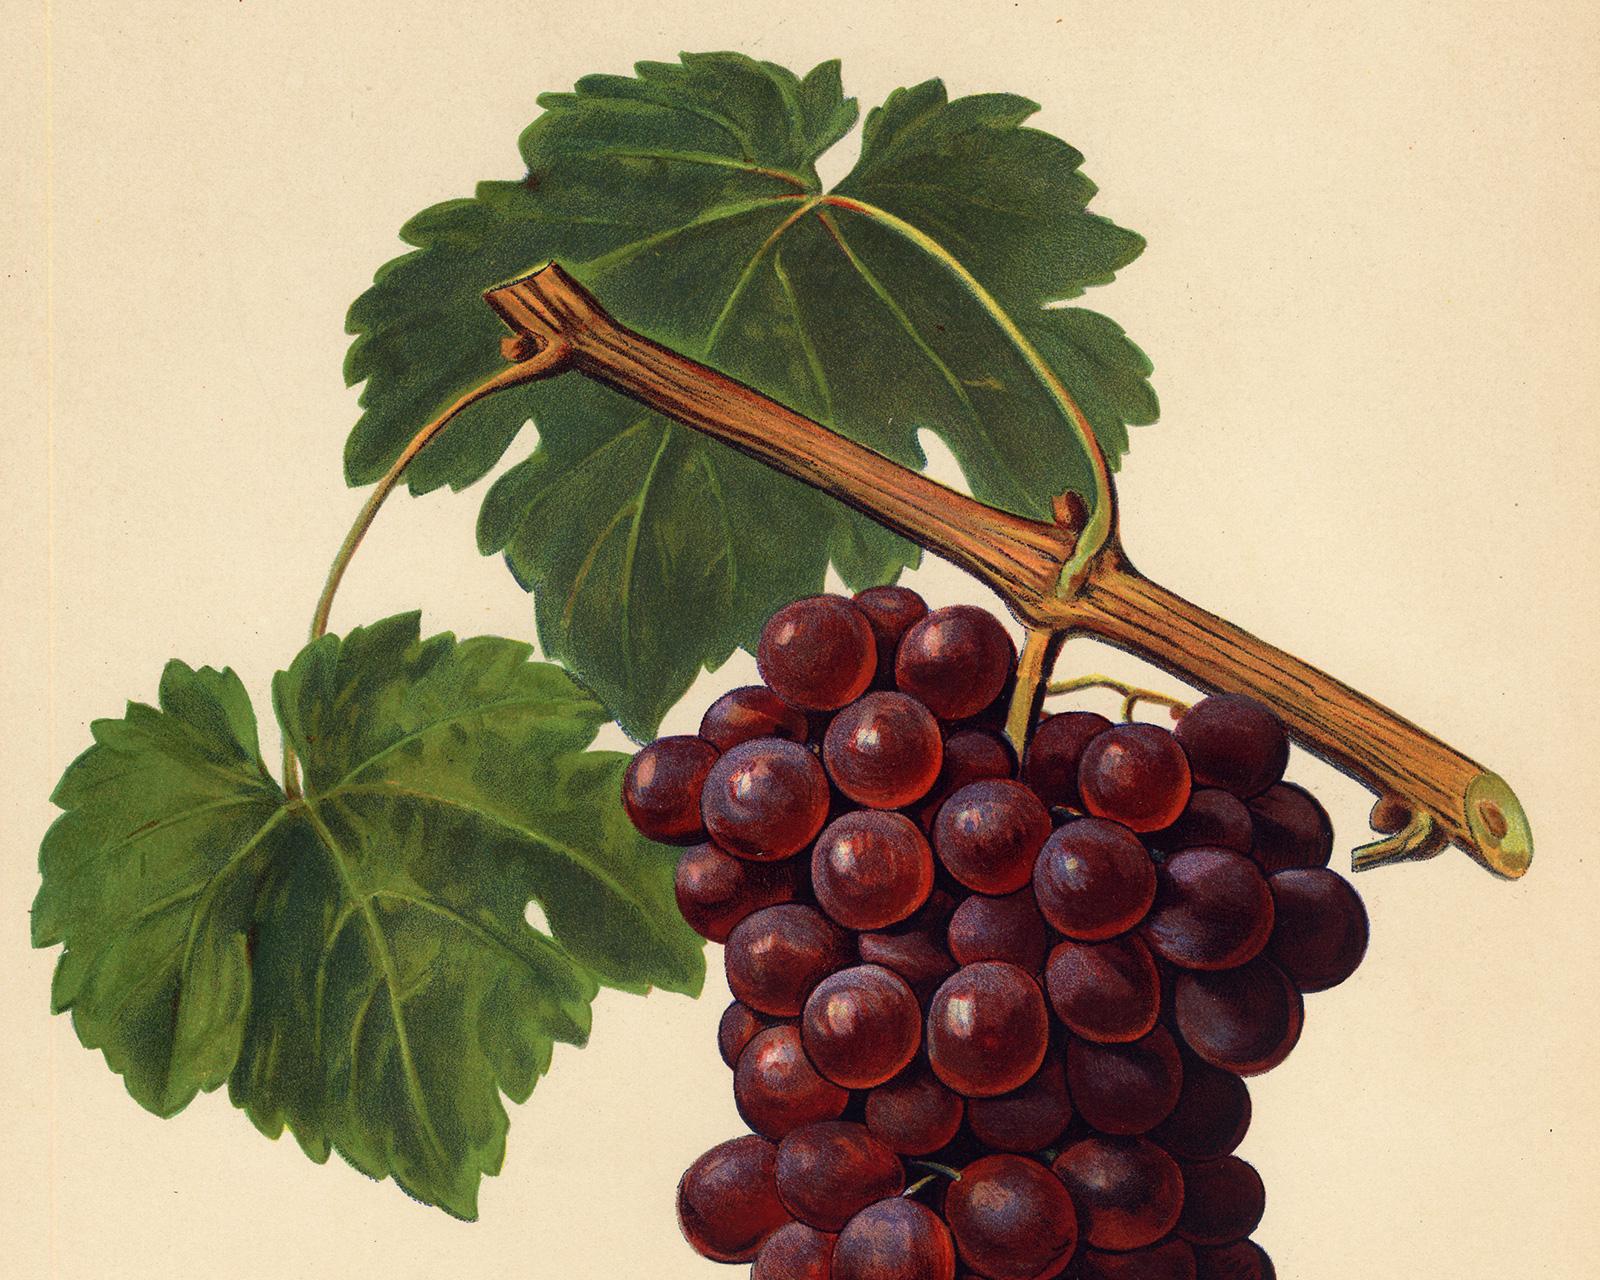 The Romanka grape - from Ampelography by Vermorel - Lithograph - Early 20th c. - White Print by Victor Vermorel